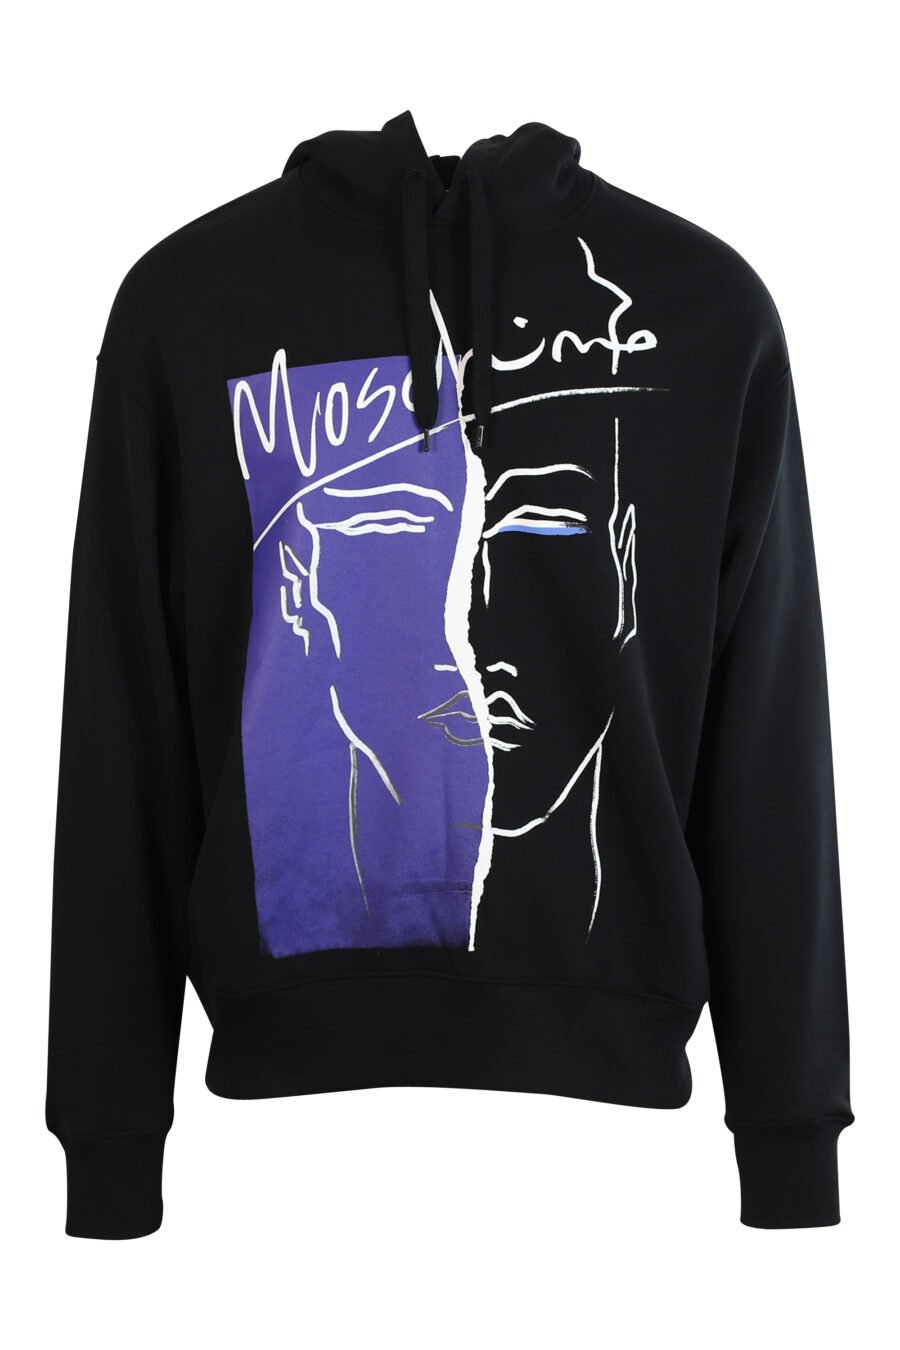 Black hooded sweatshirt with black and lilac face print - 889316192889